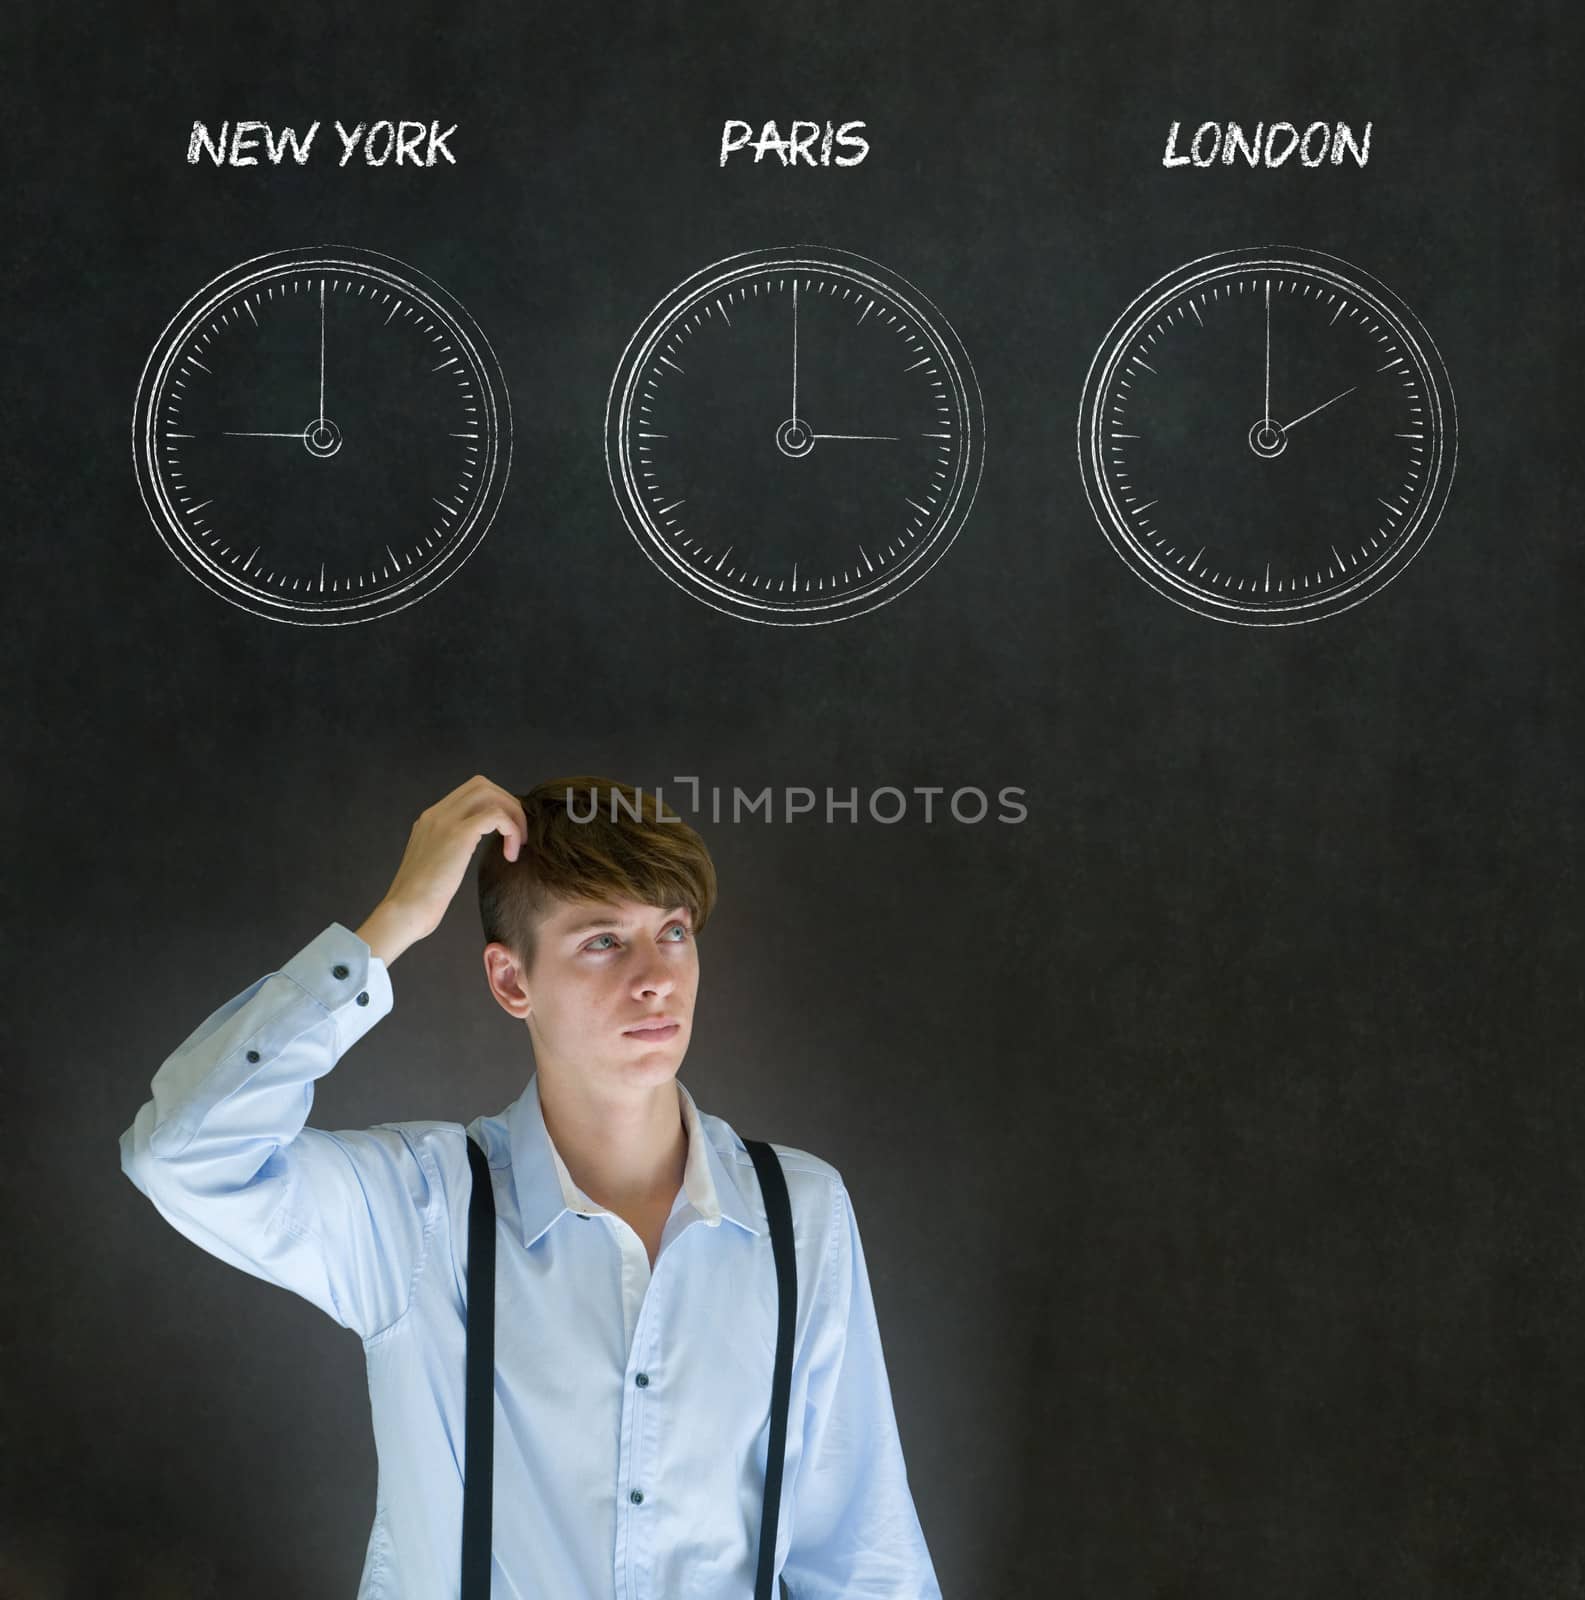 Businessman thinking with New York, Paris and London chalk time zone clocks on blackboard background